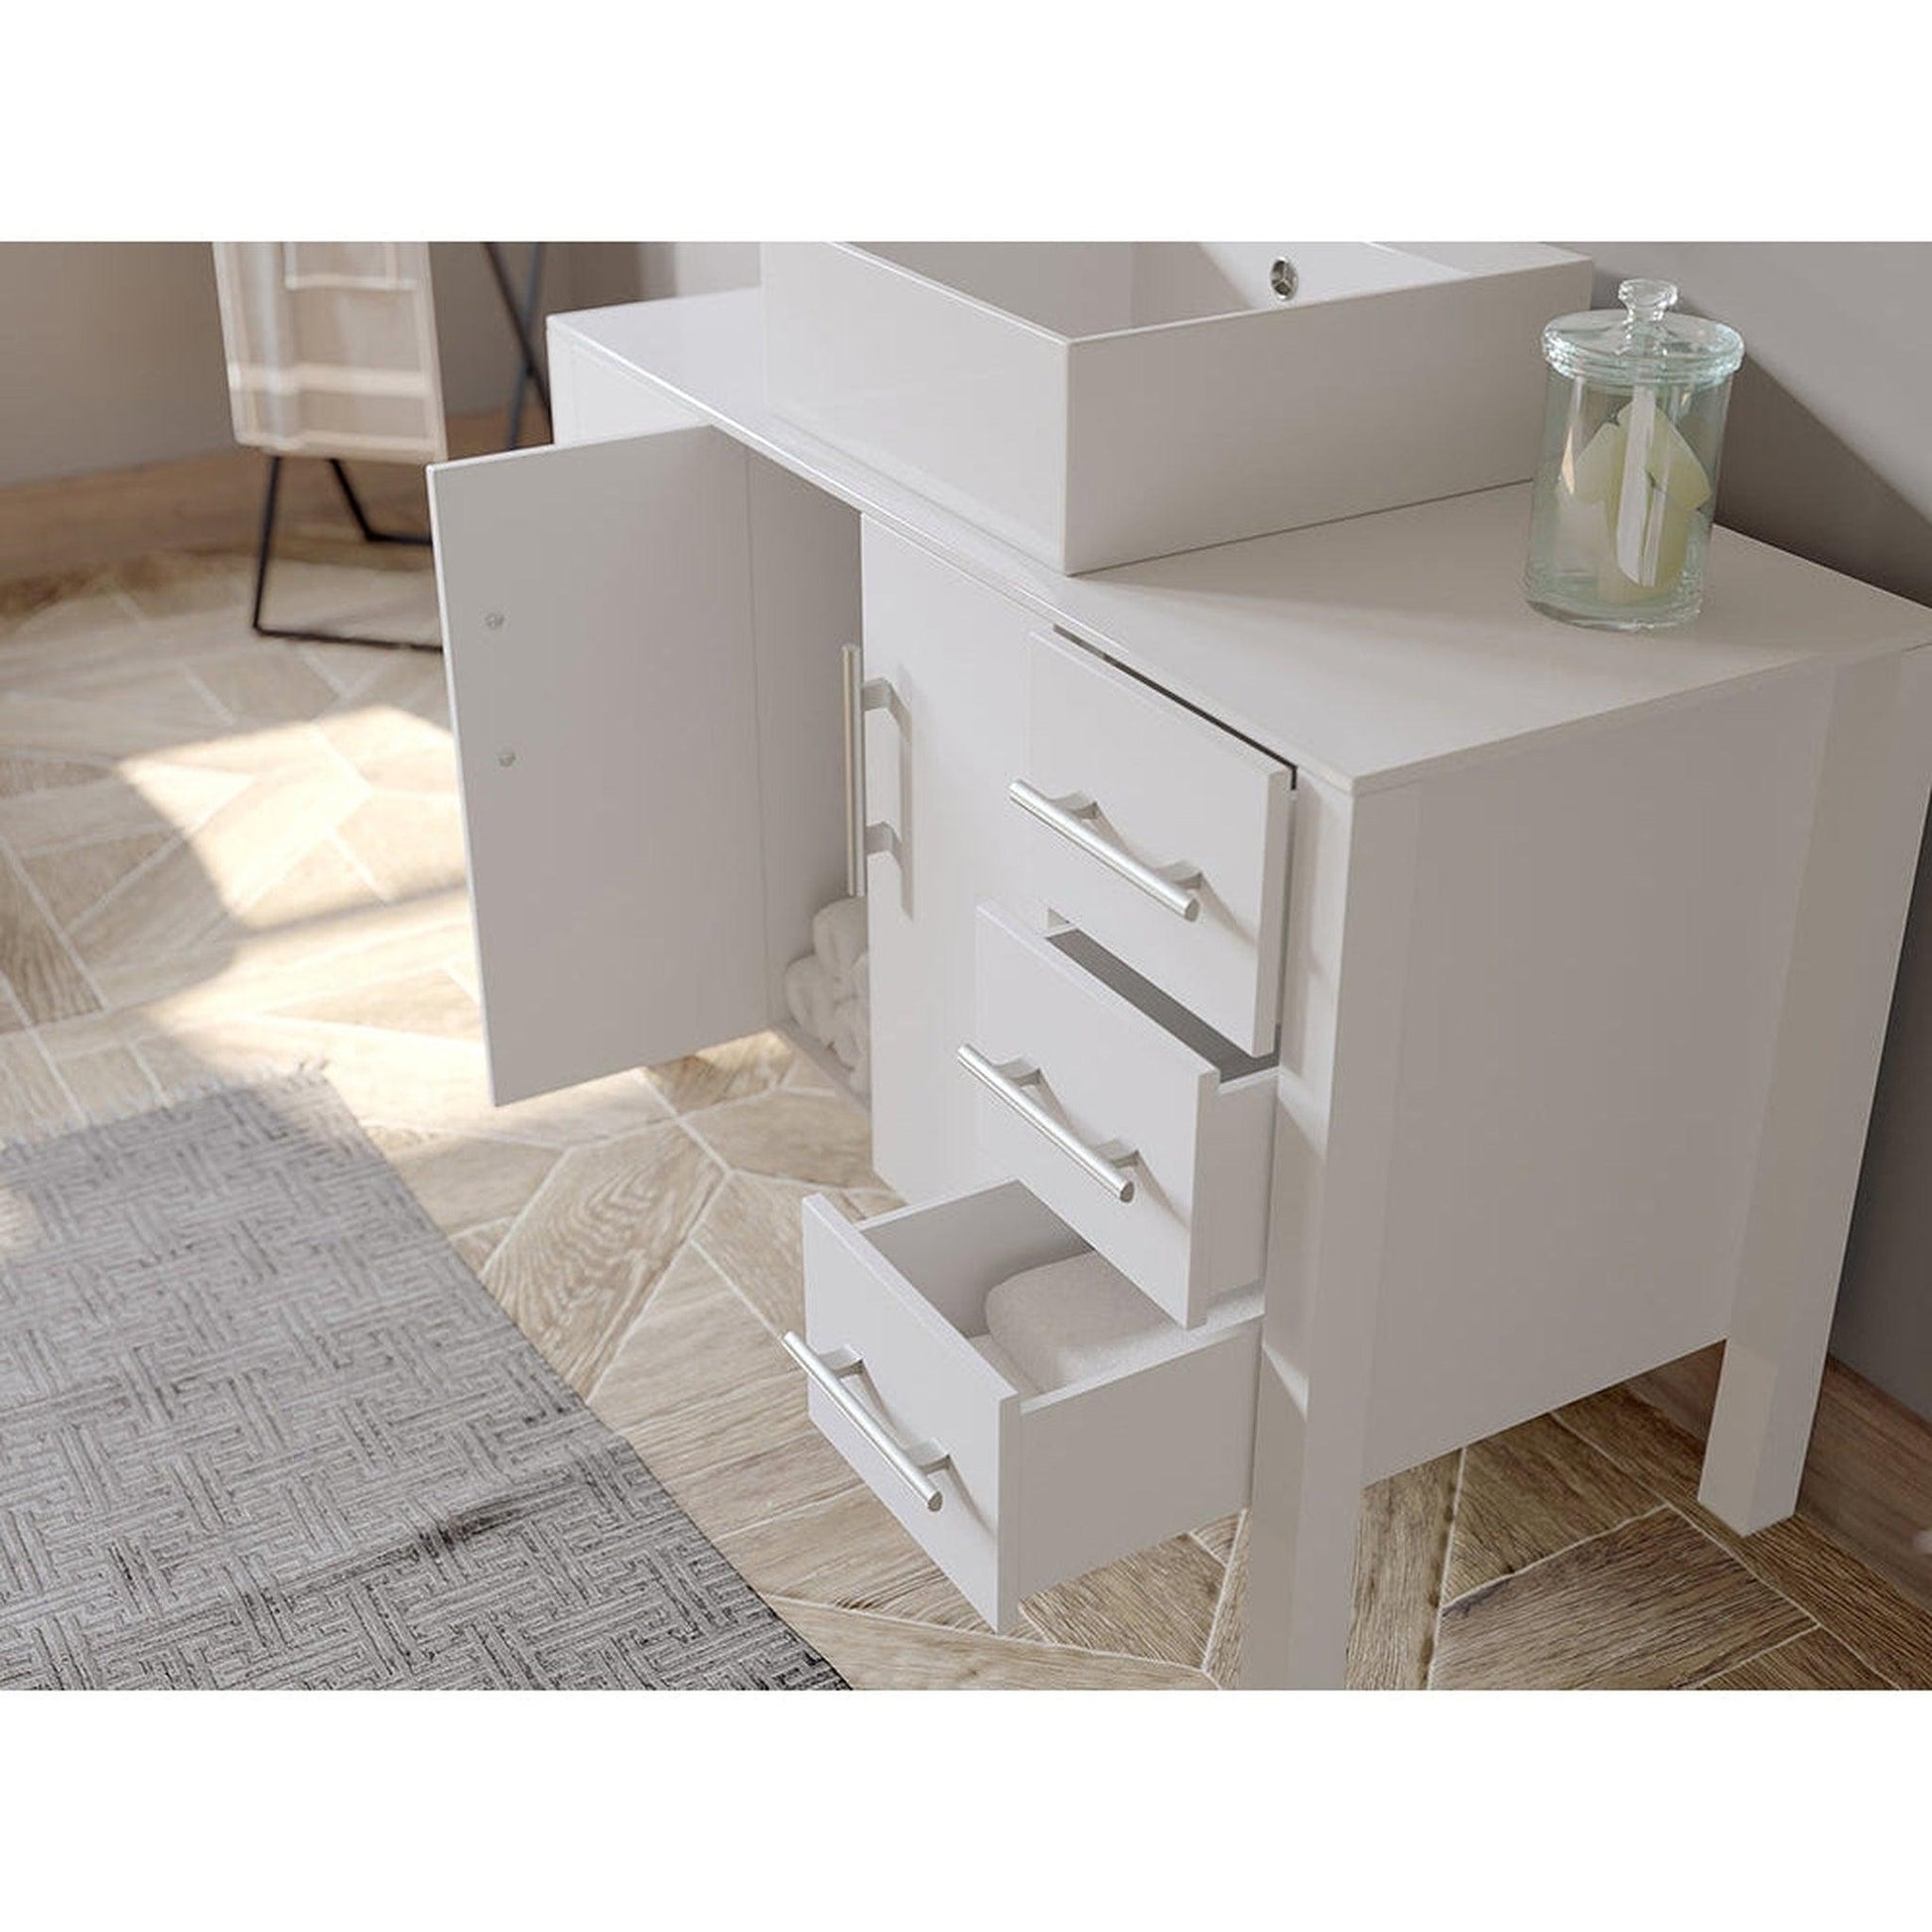 Cambridge Plumbing 48" White Wood Single Vanity Set With Porcelain Countertop And Square Vessel Sink With Faucet Hole And Brushed Nickel Plumbing Finish